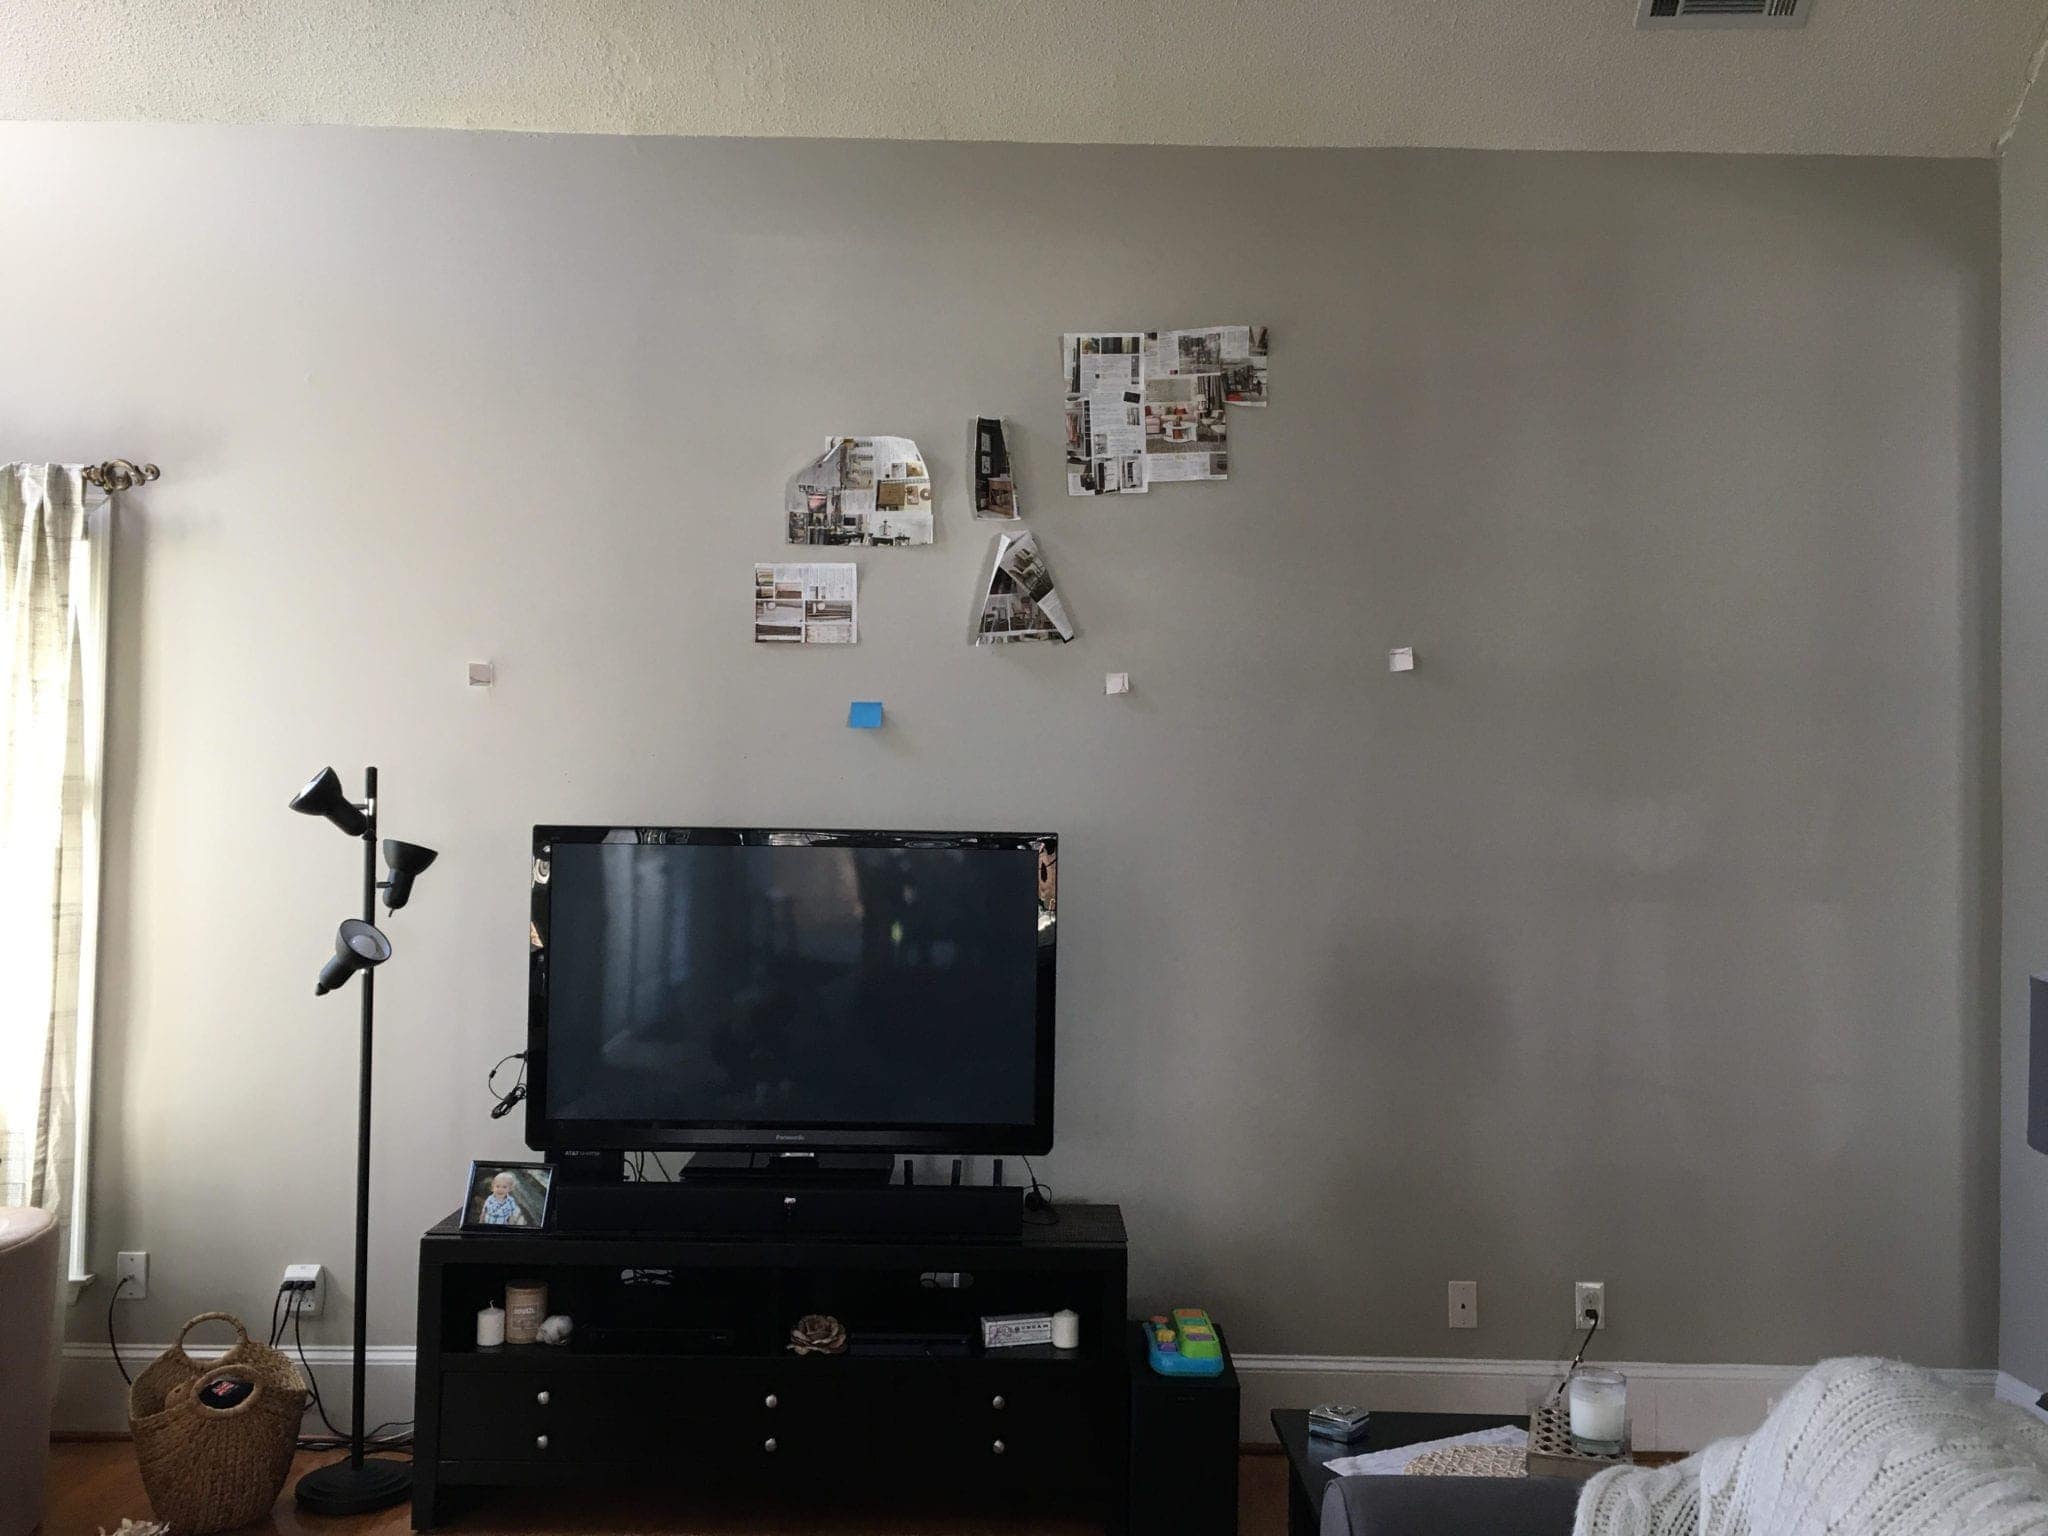 A reader wants to create a gallery wall surrounding her TV but has no idea where to start. Here is the space she has to work with.